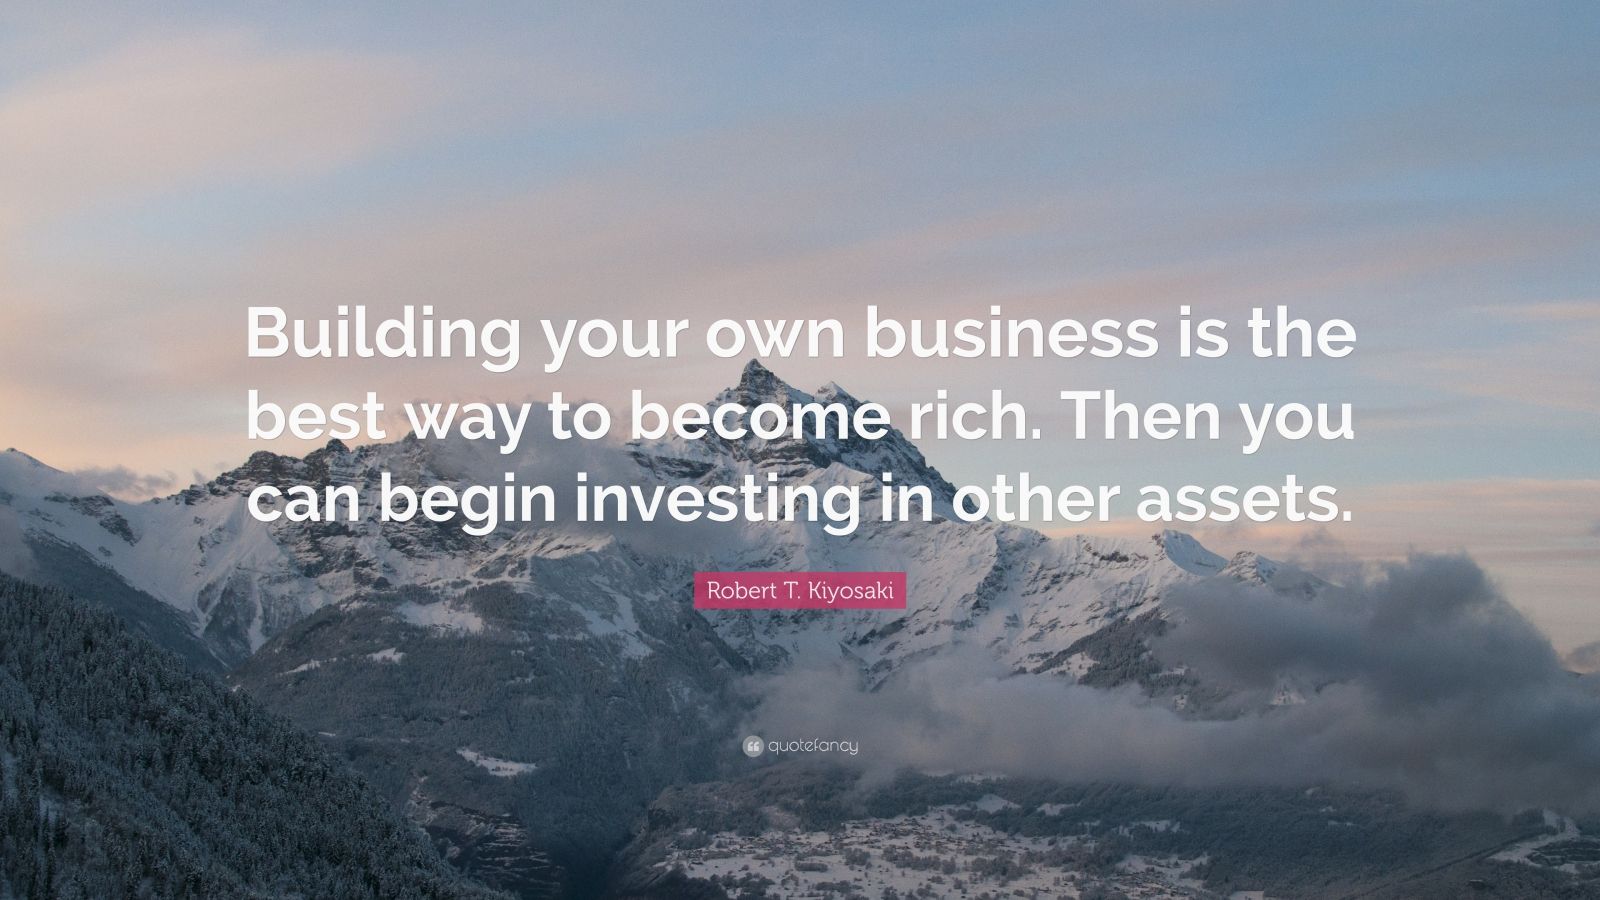 Is Business The Best Way To Get Rich